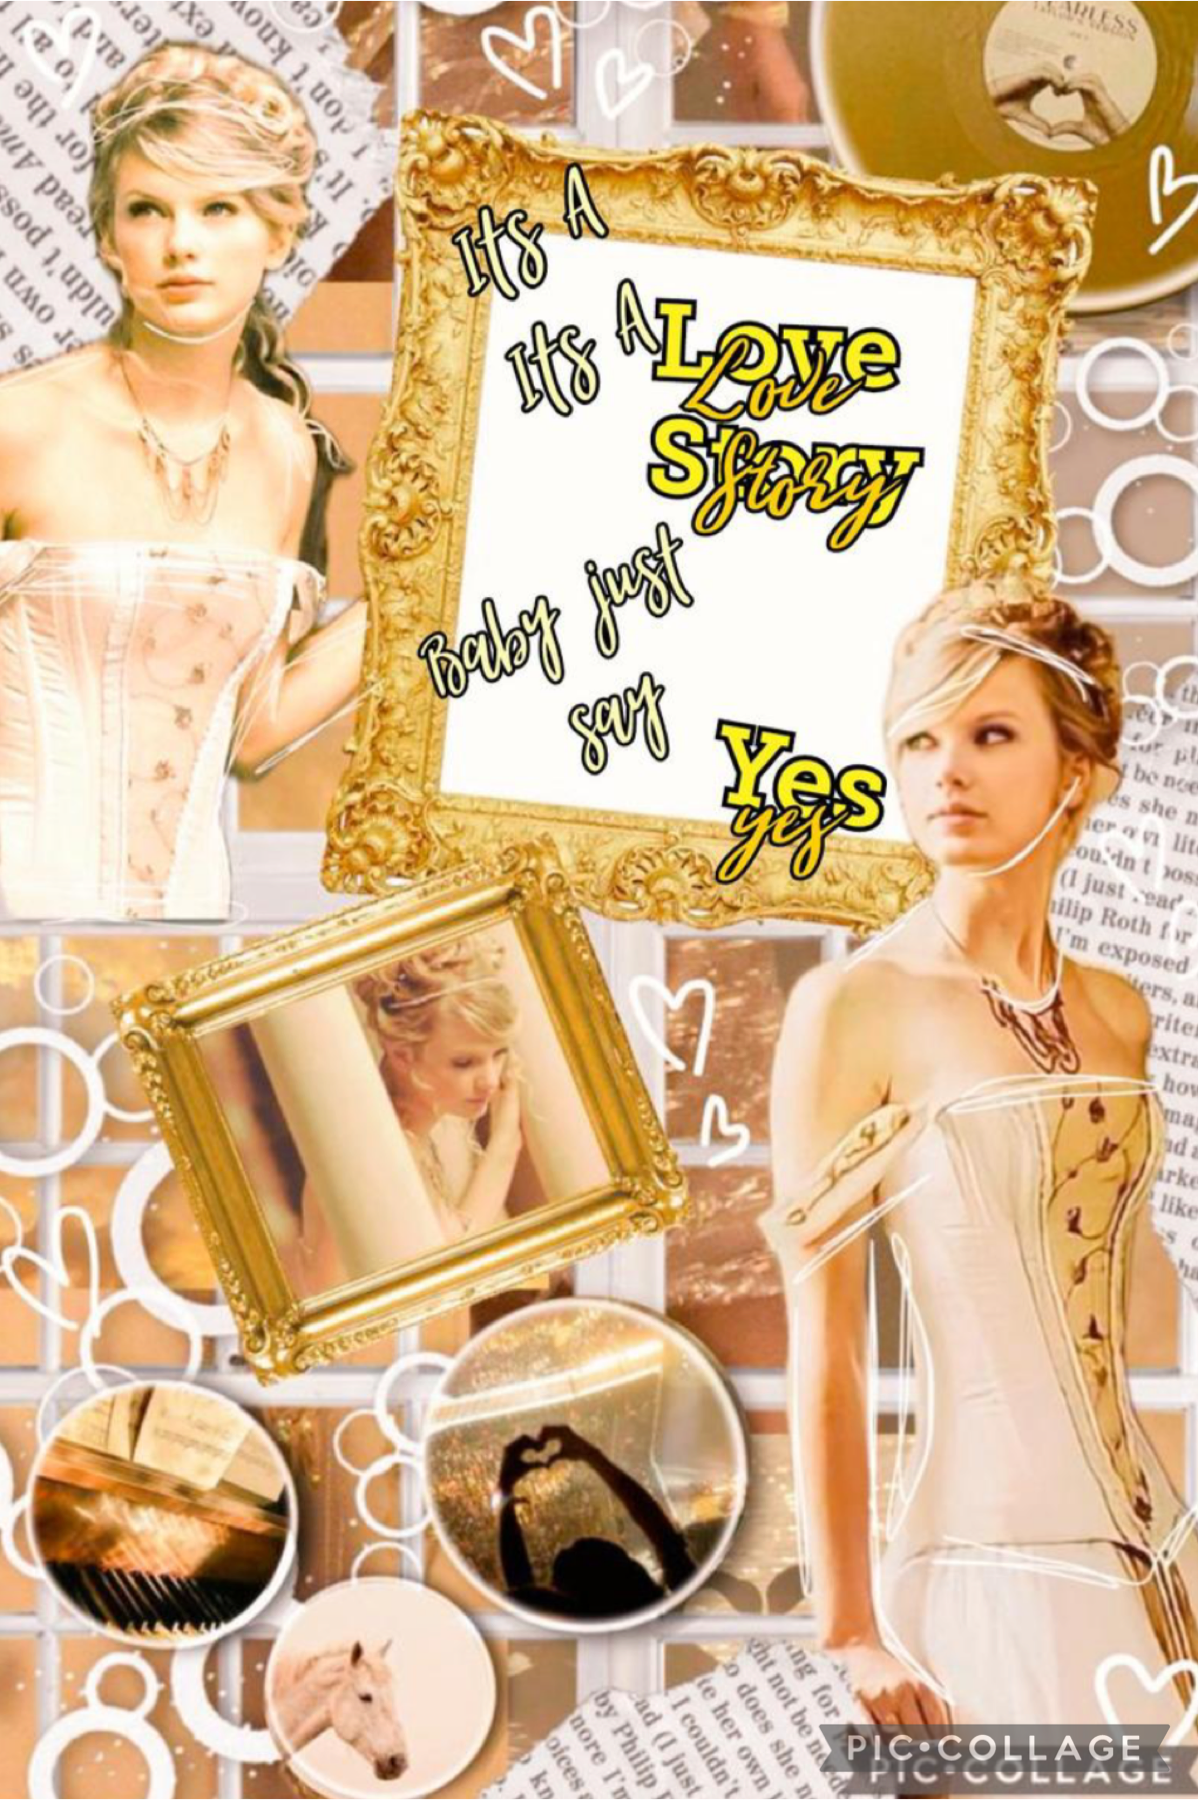 pt 2!!
this time I did the bg and TwilightSwiftie did the stunning text!
I had so much fun collabing with you <3